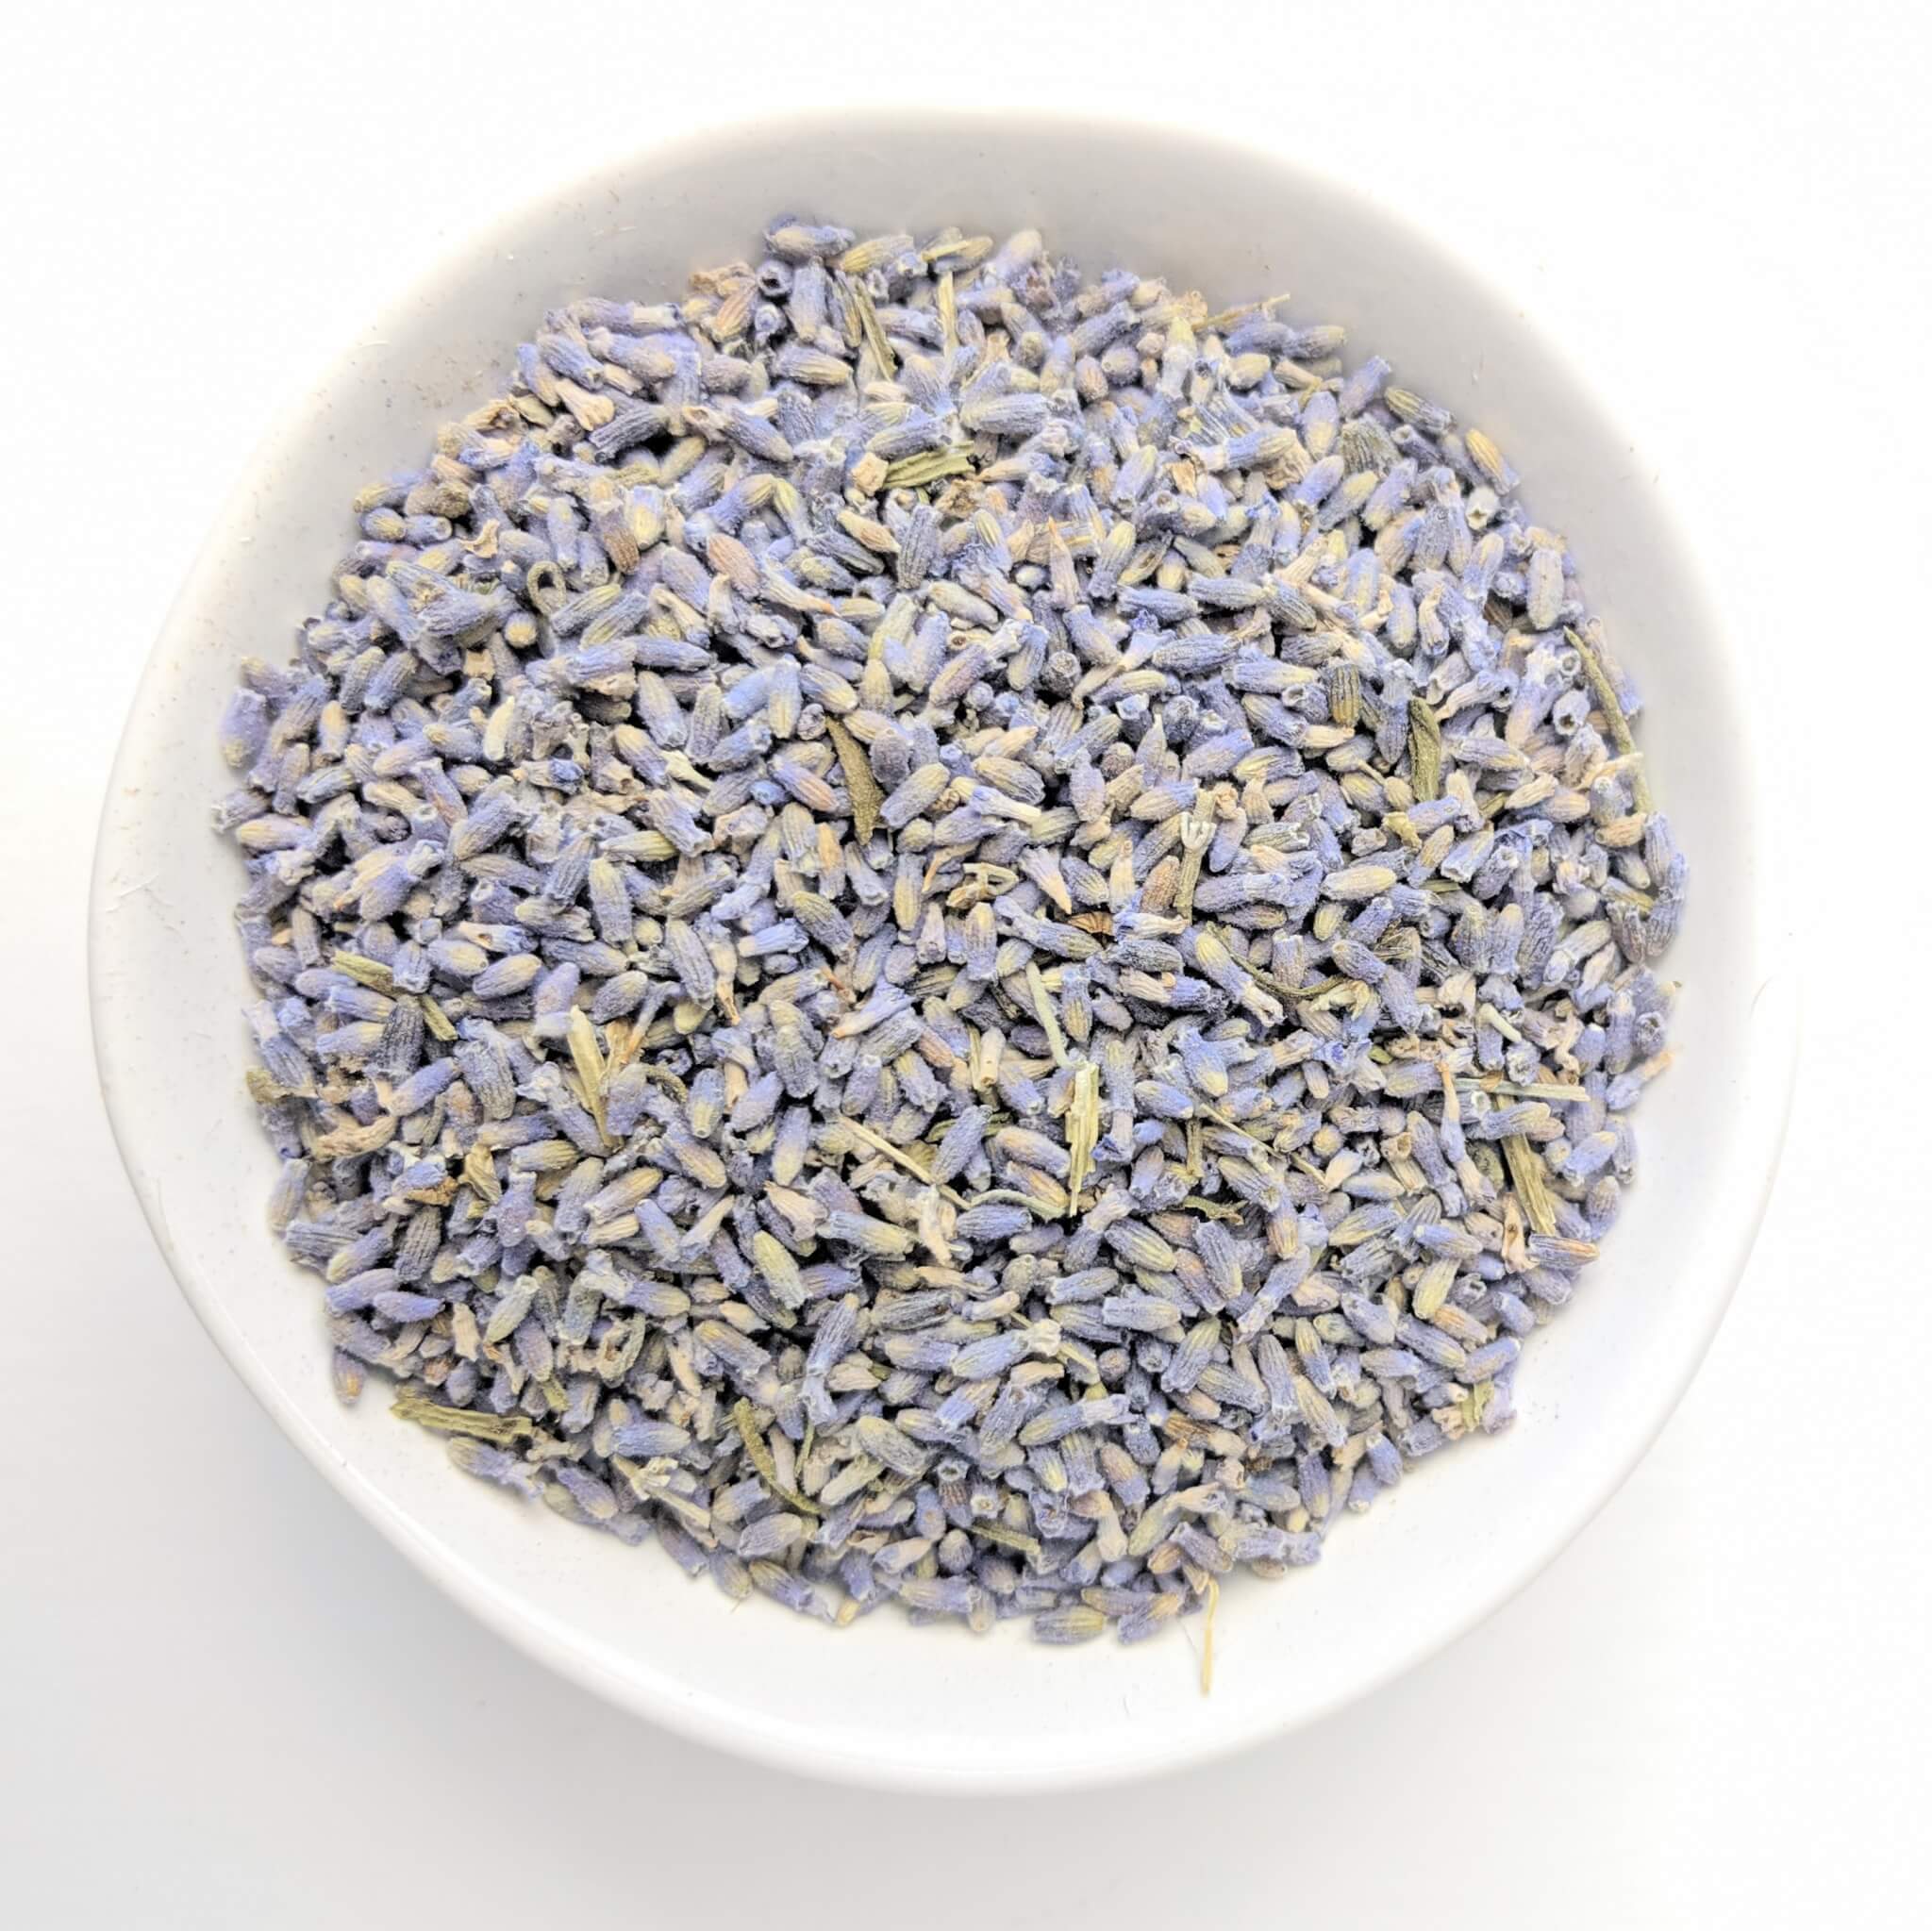 Organic Lavender Flowers in a White Bowl Top View